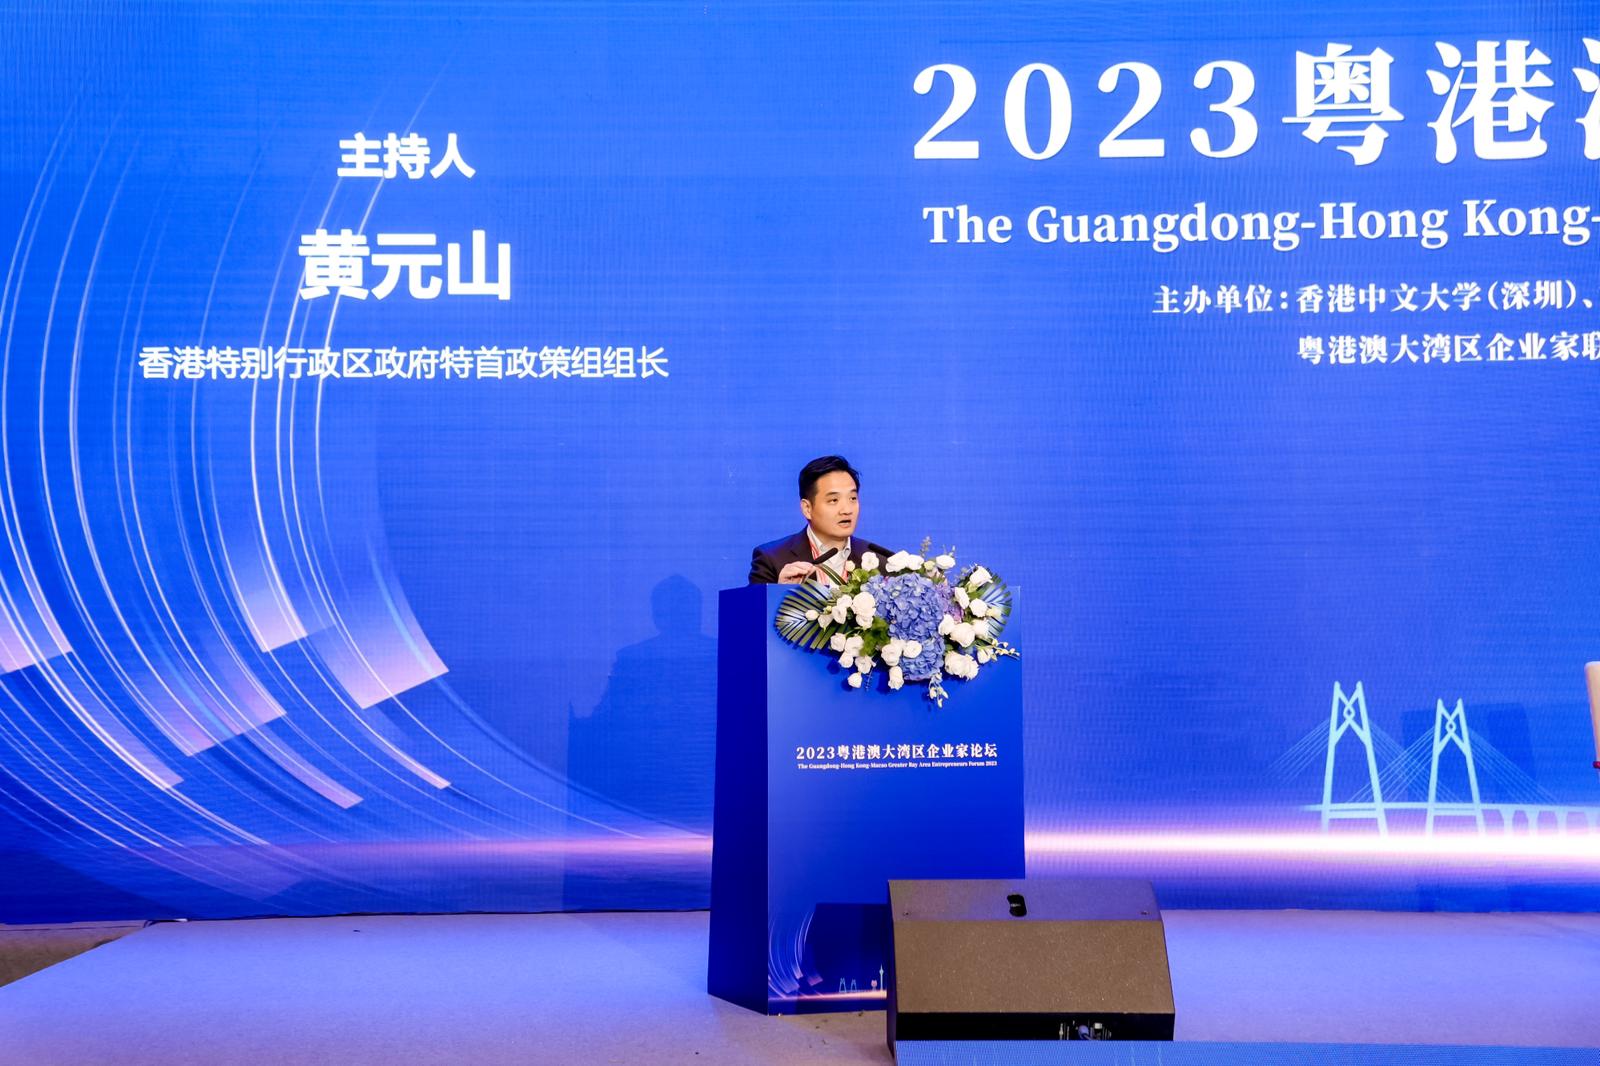 Dr Stephen WONG, Head of the CEPU, attended the Greater Bay Area Entrepreneurs Forum 2023 and moderated the keynote session titled “Promoting Entrepreneurship and Opening up New Horizons for Integrated Development of the GBA”.